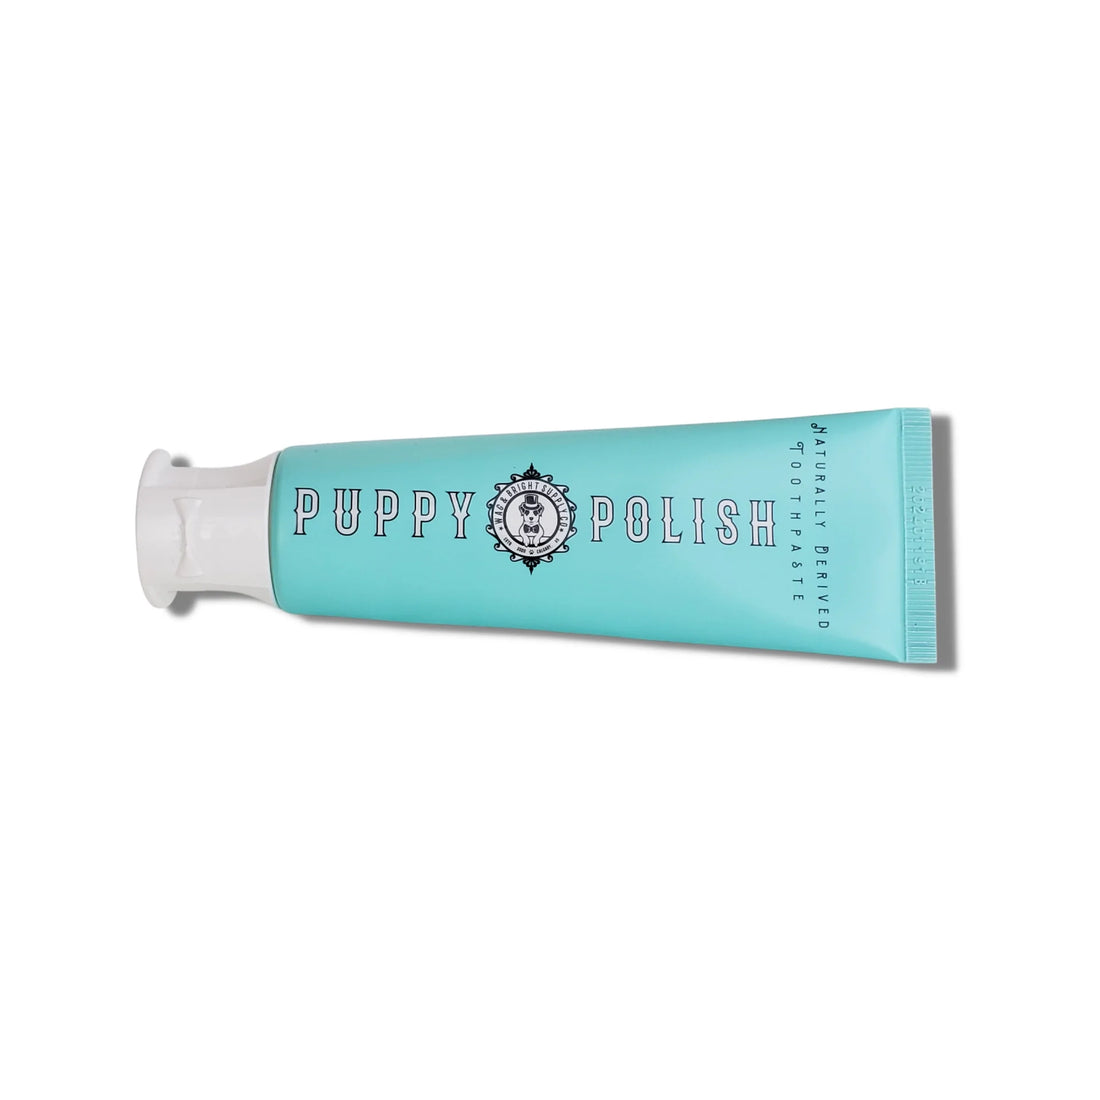 Puppy Polish Natural Dog Toothpaste